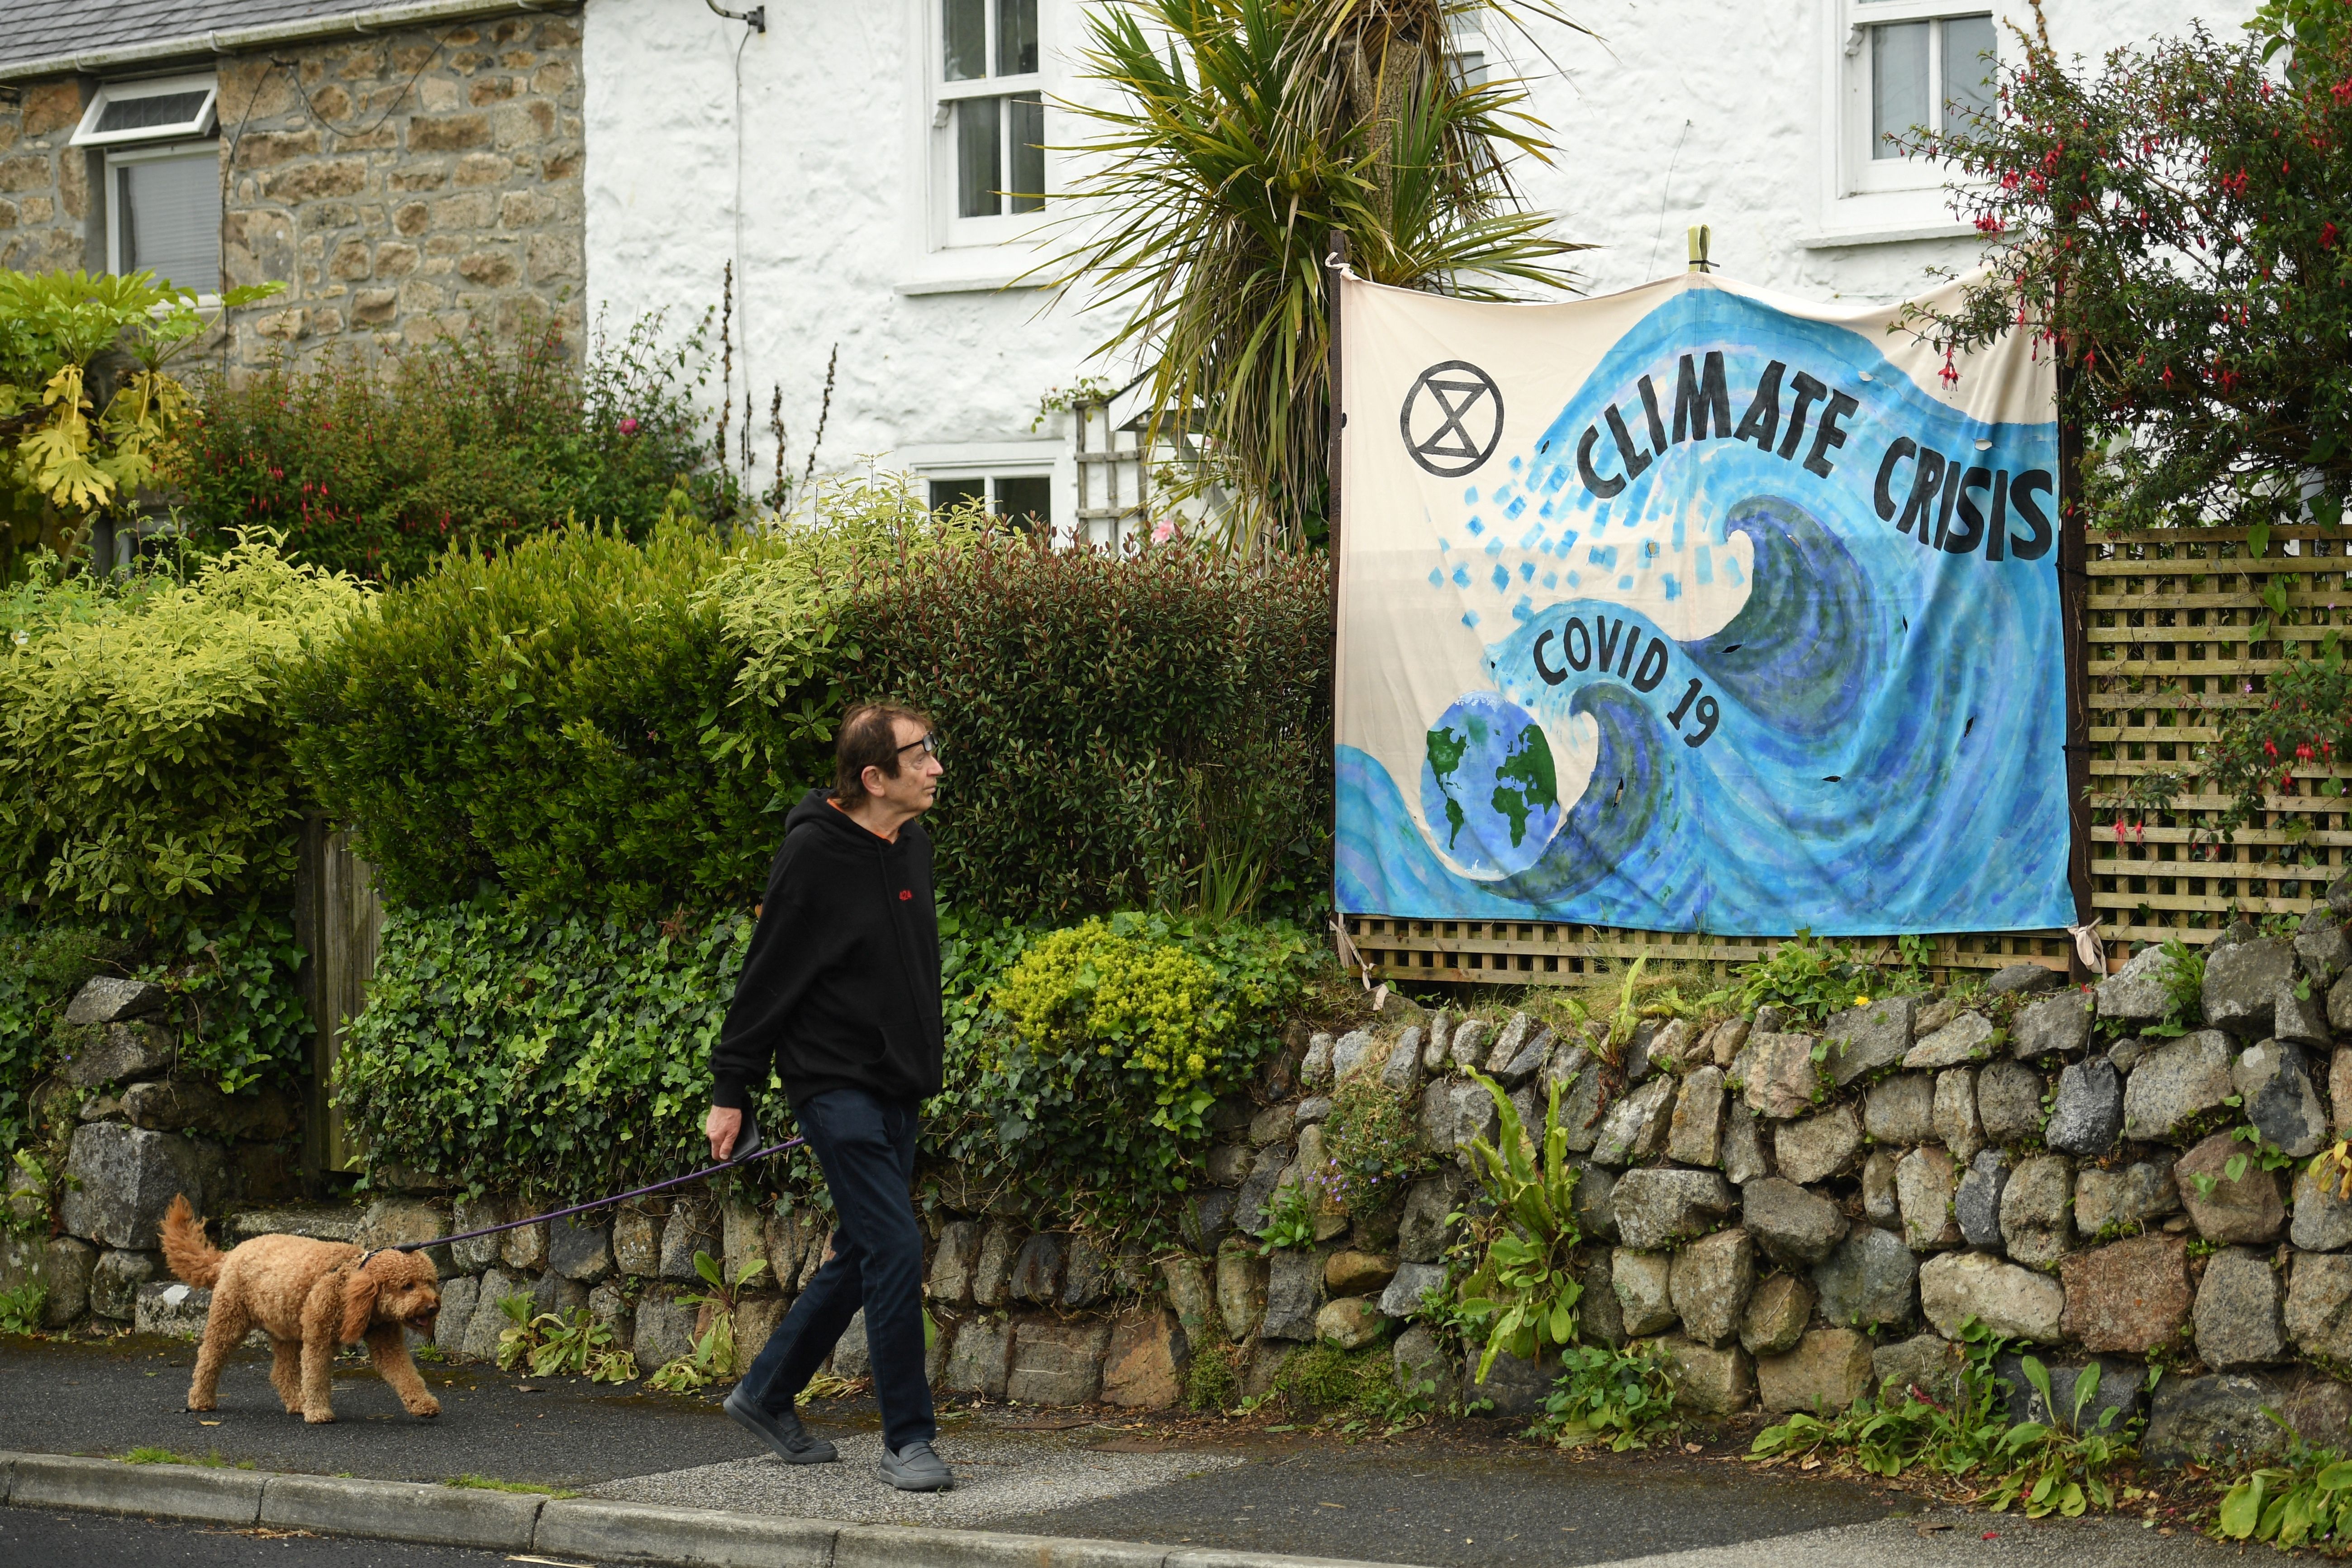 A man walks past a banner displayed on a garden wall in St Ives, Cornwall, ahead of the three-day G7 summit being held from 11-13 June